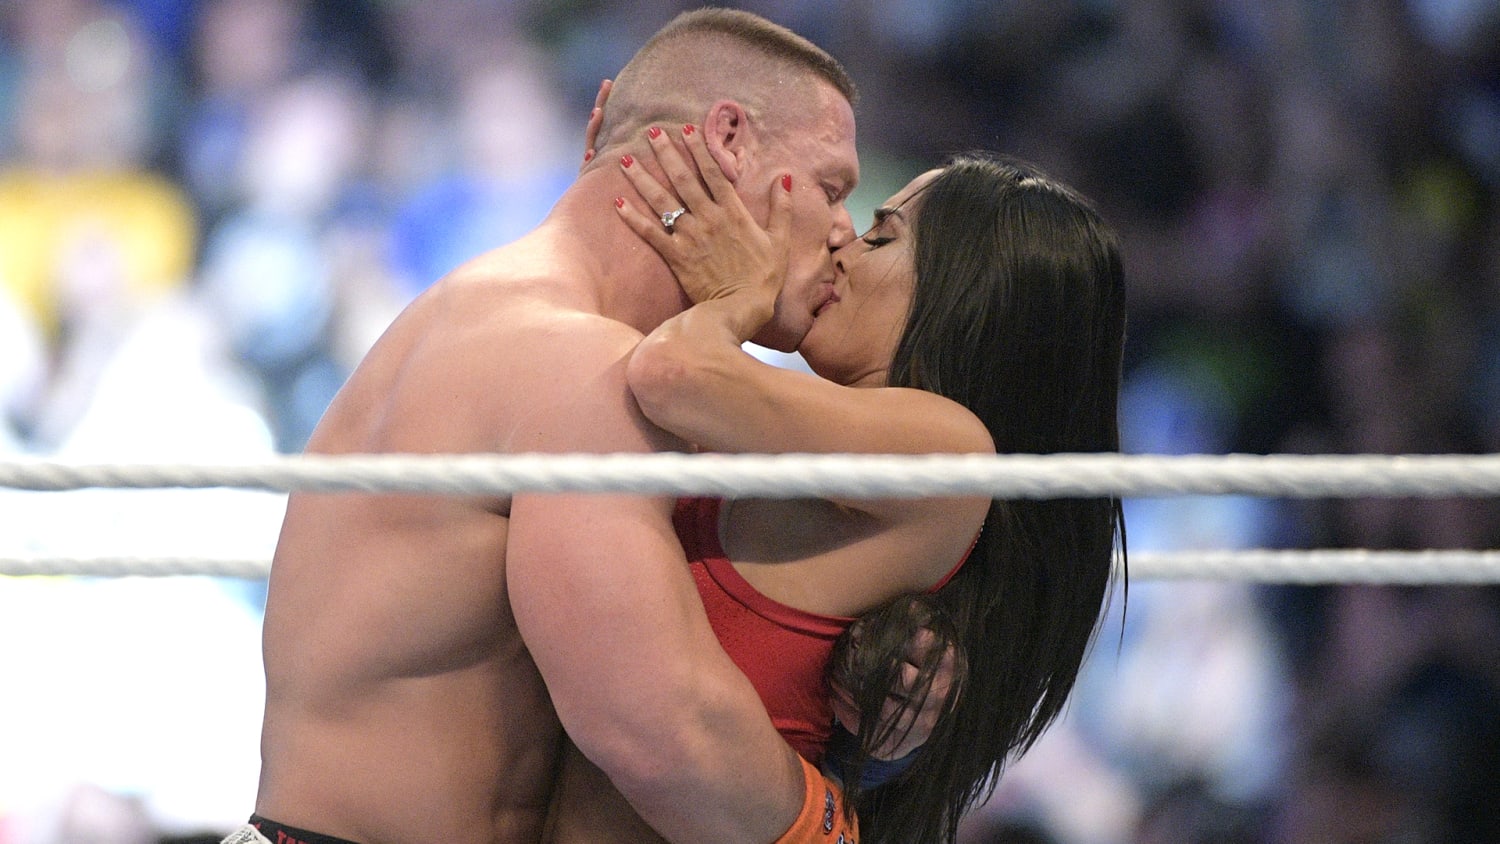 John Cena pops the question to Nikki Bella at WrestleMania 33 — and she said yes! picture